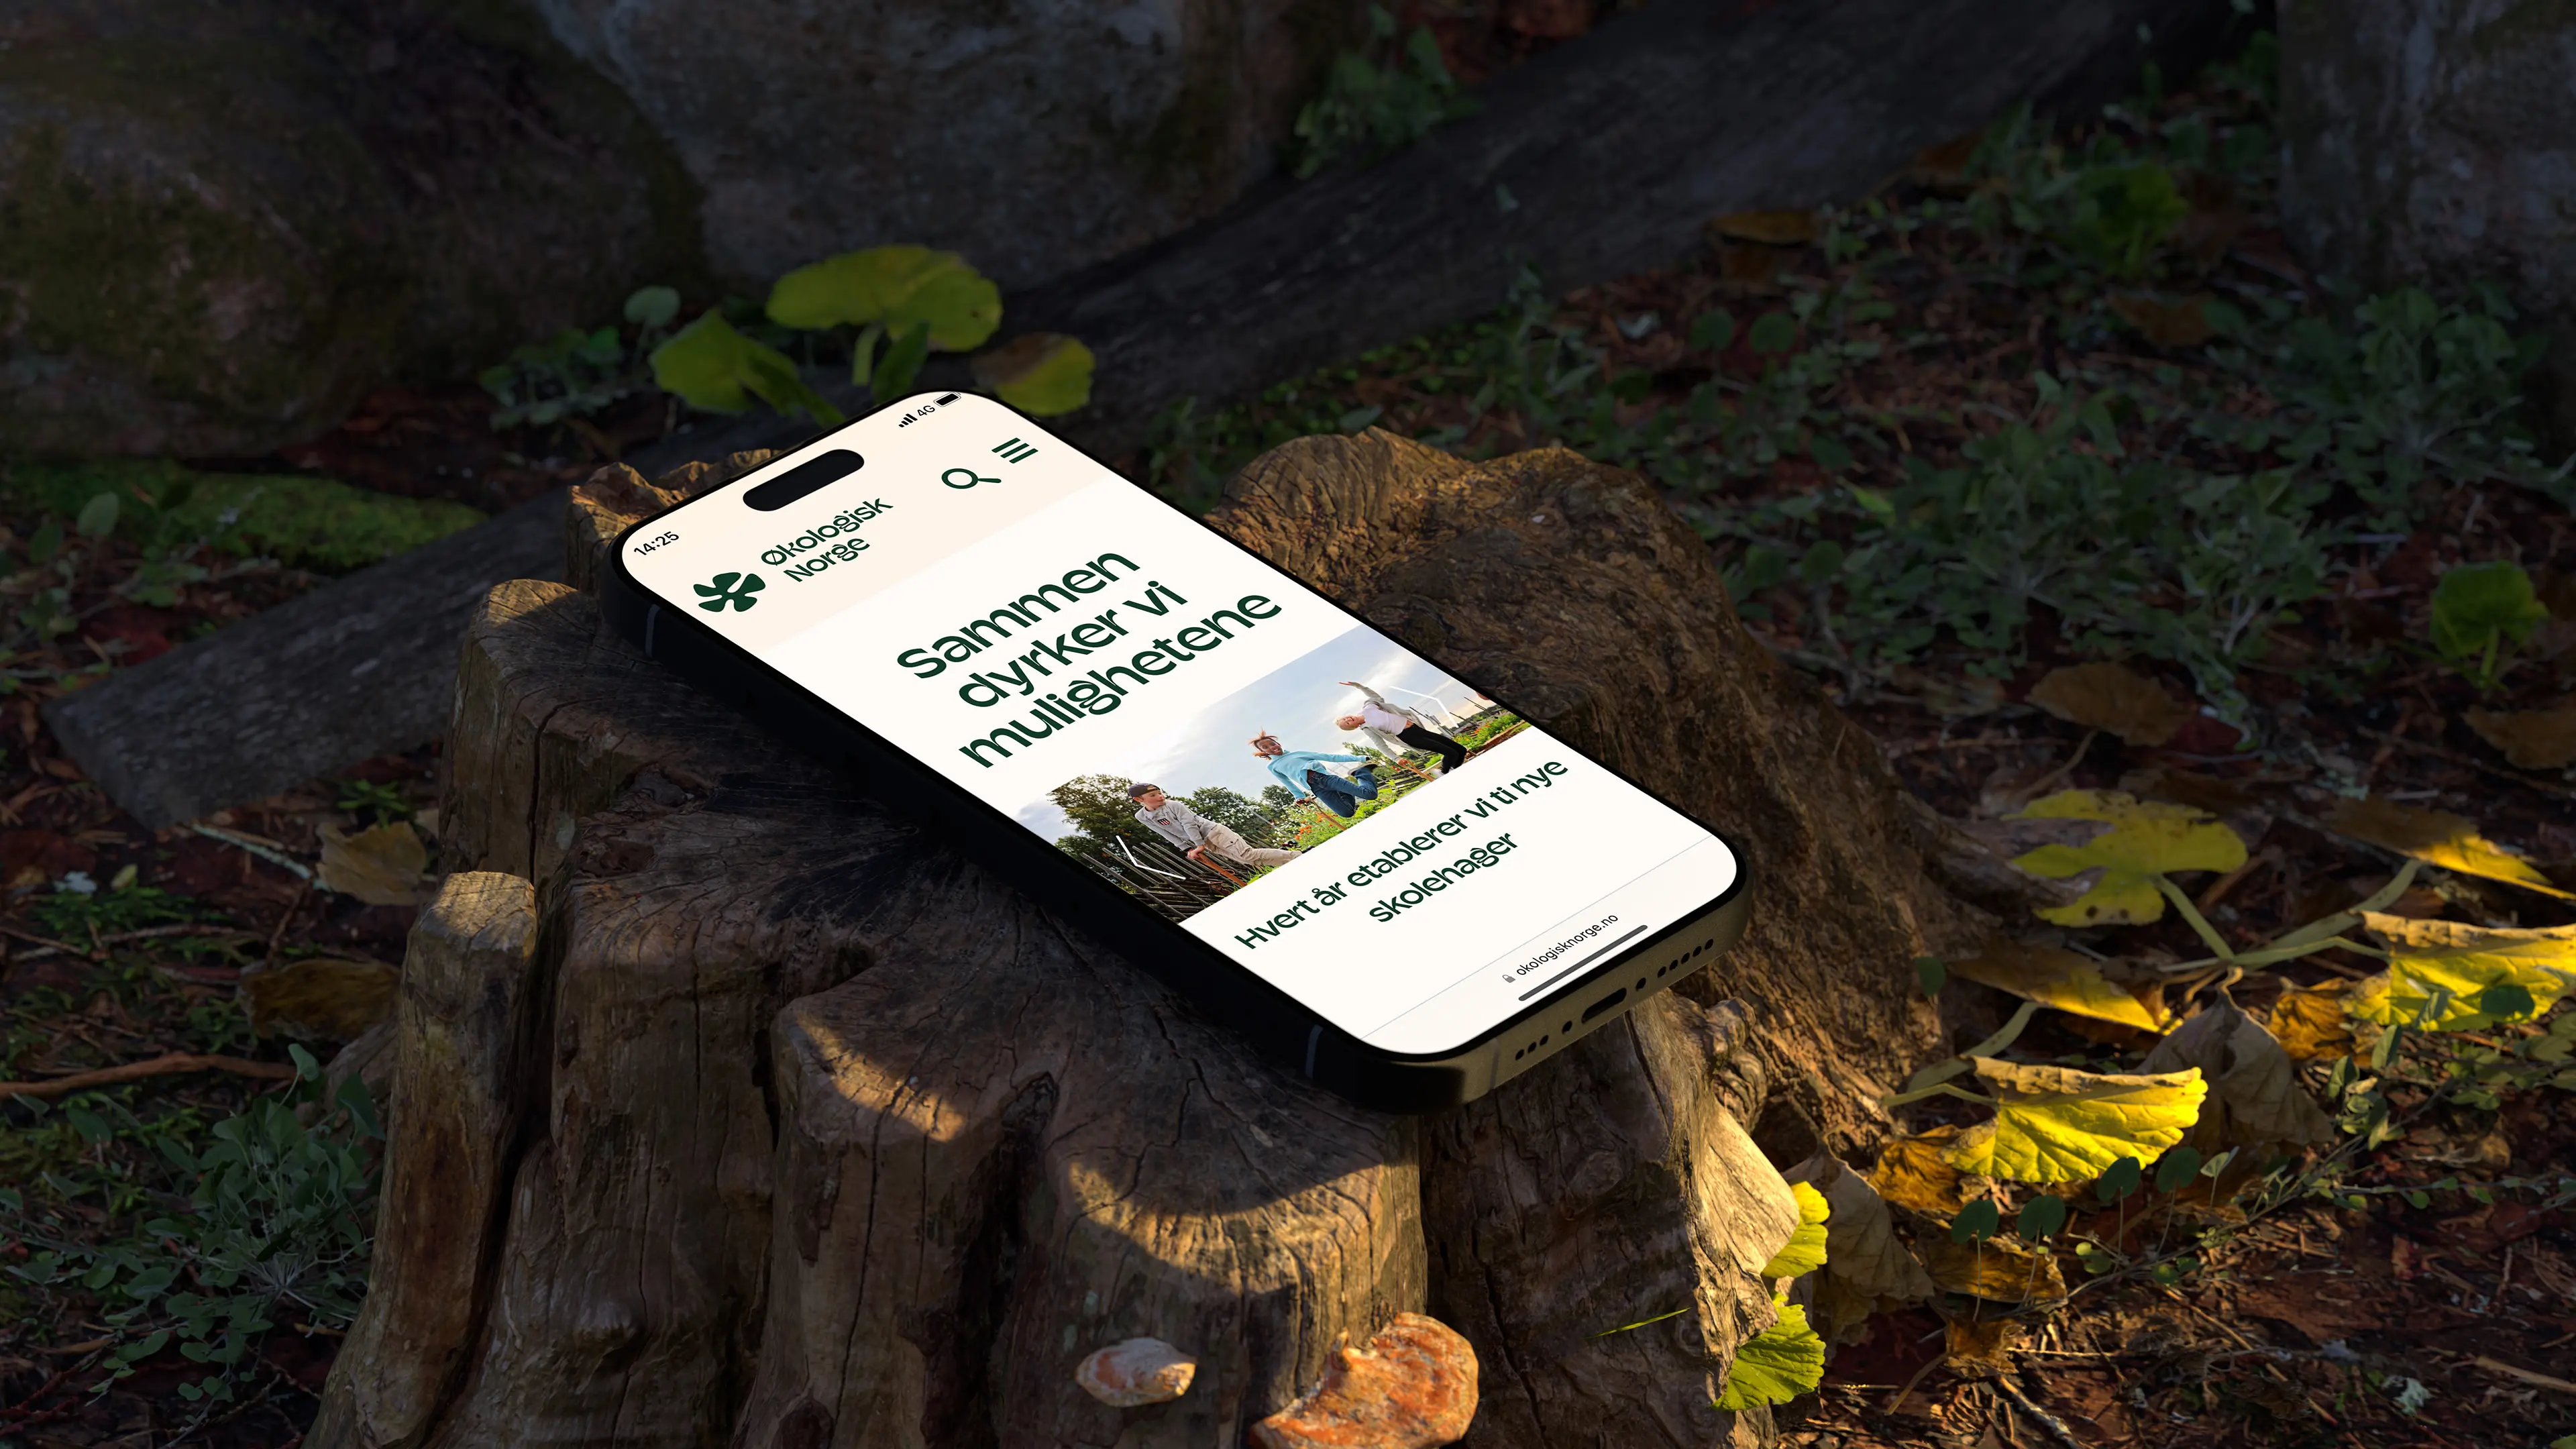 a mobile phone in a forest scenery